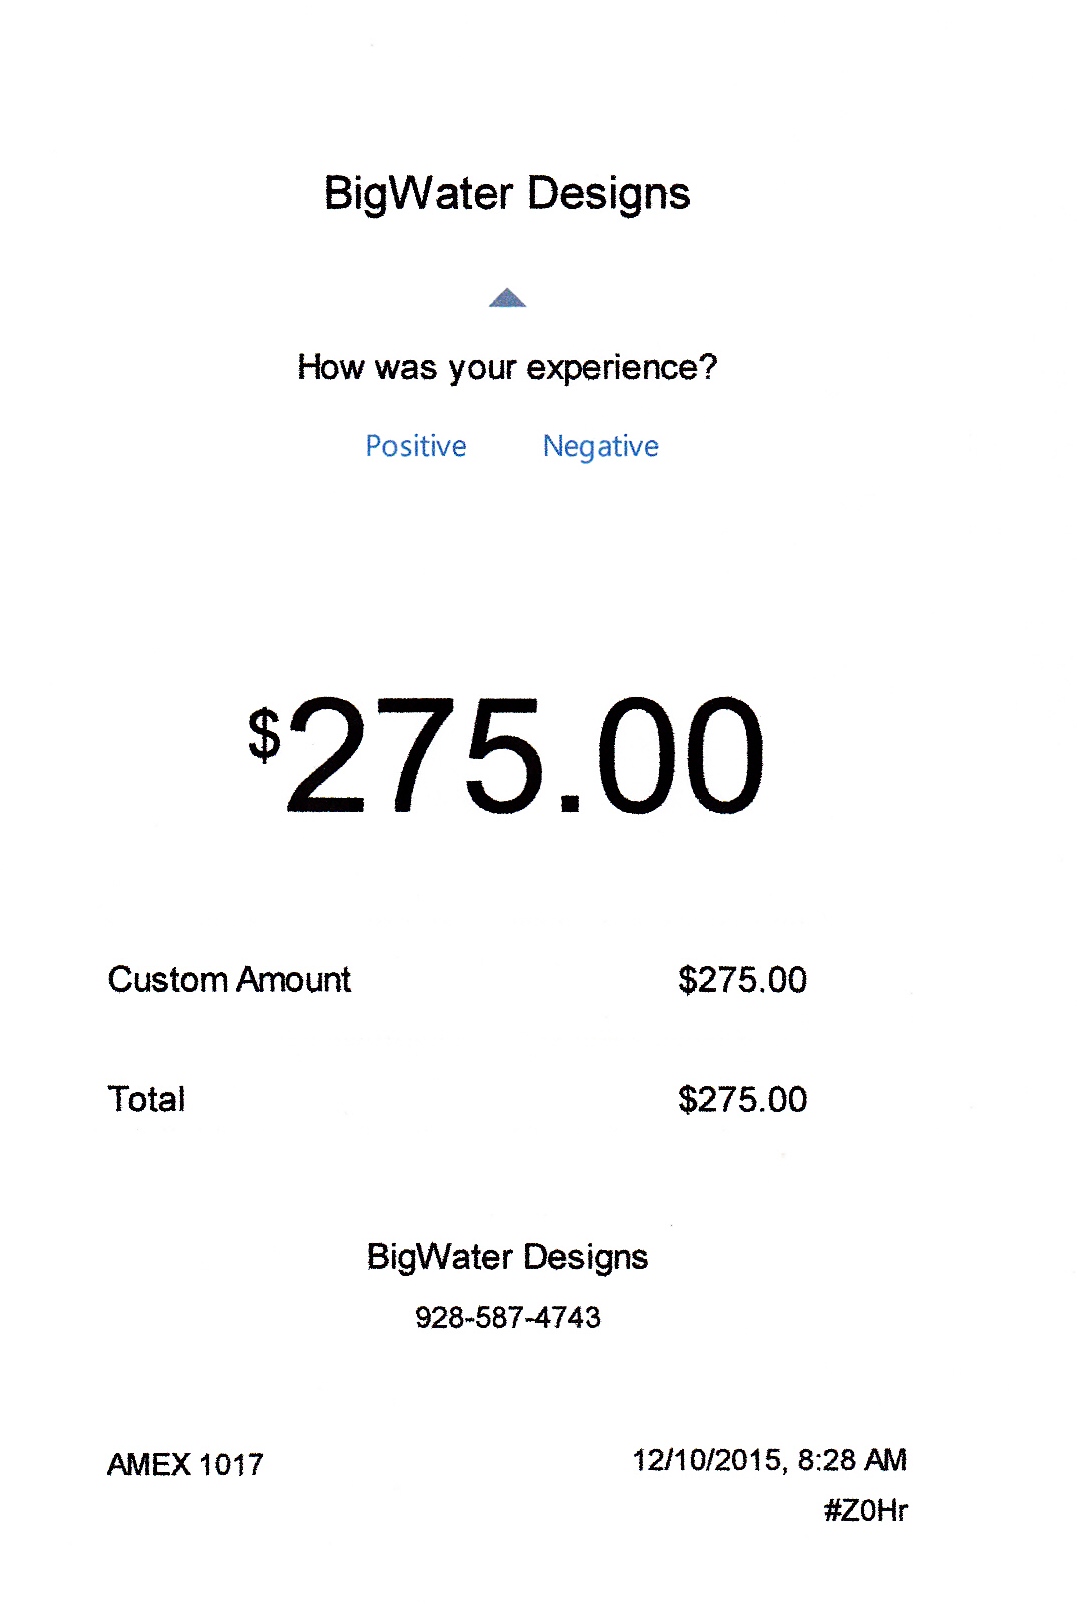 Partial payment to BigWater Designs